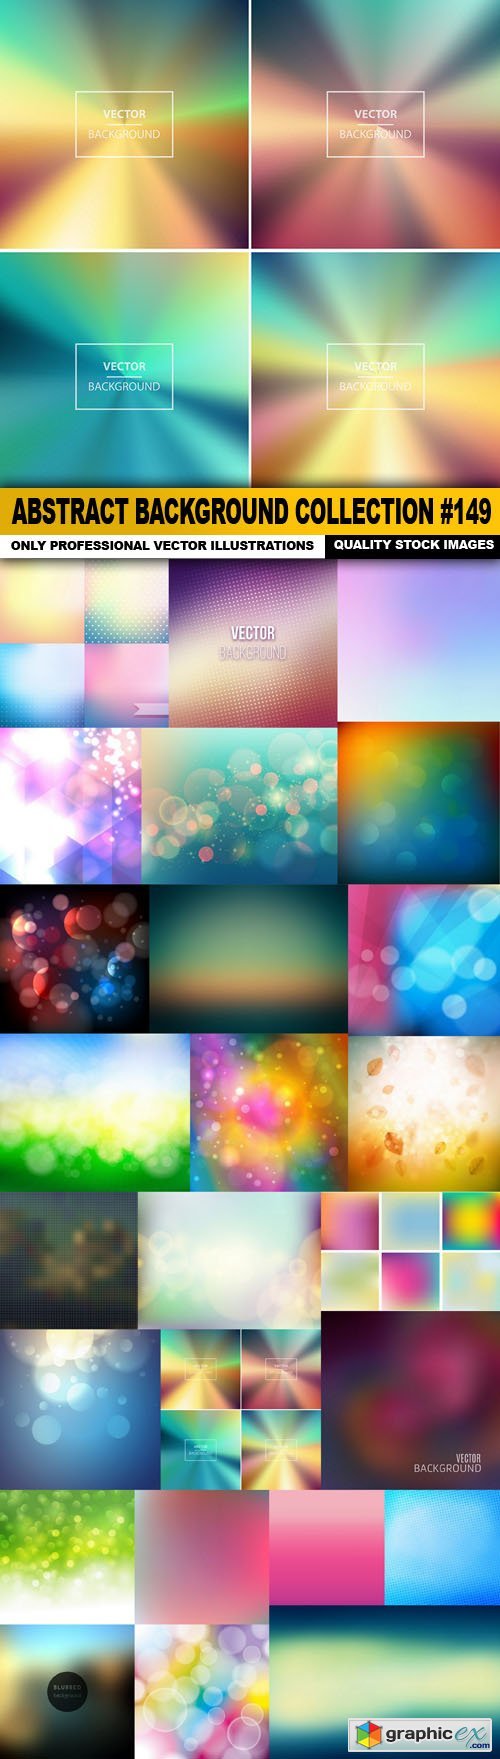 Abstract Background Collection #149